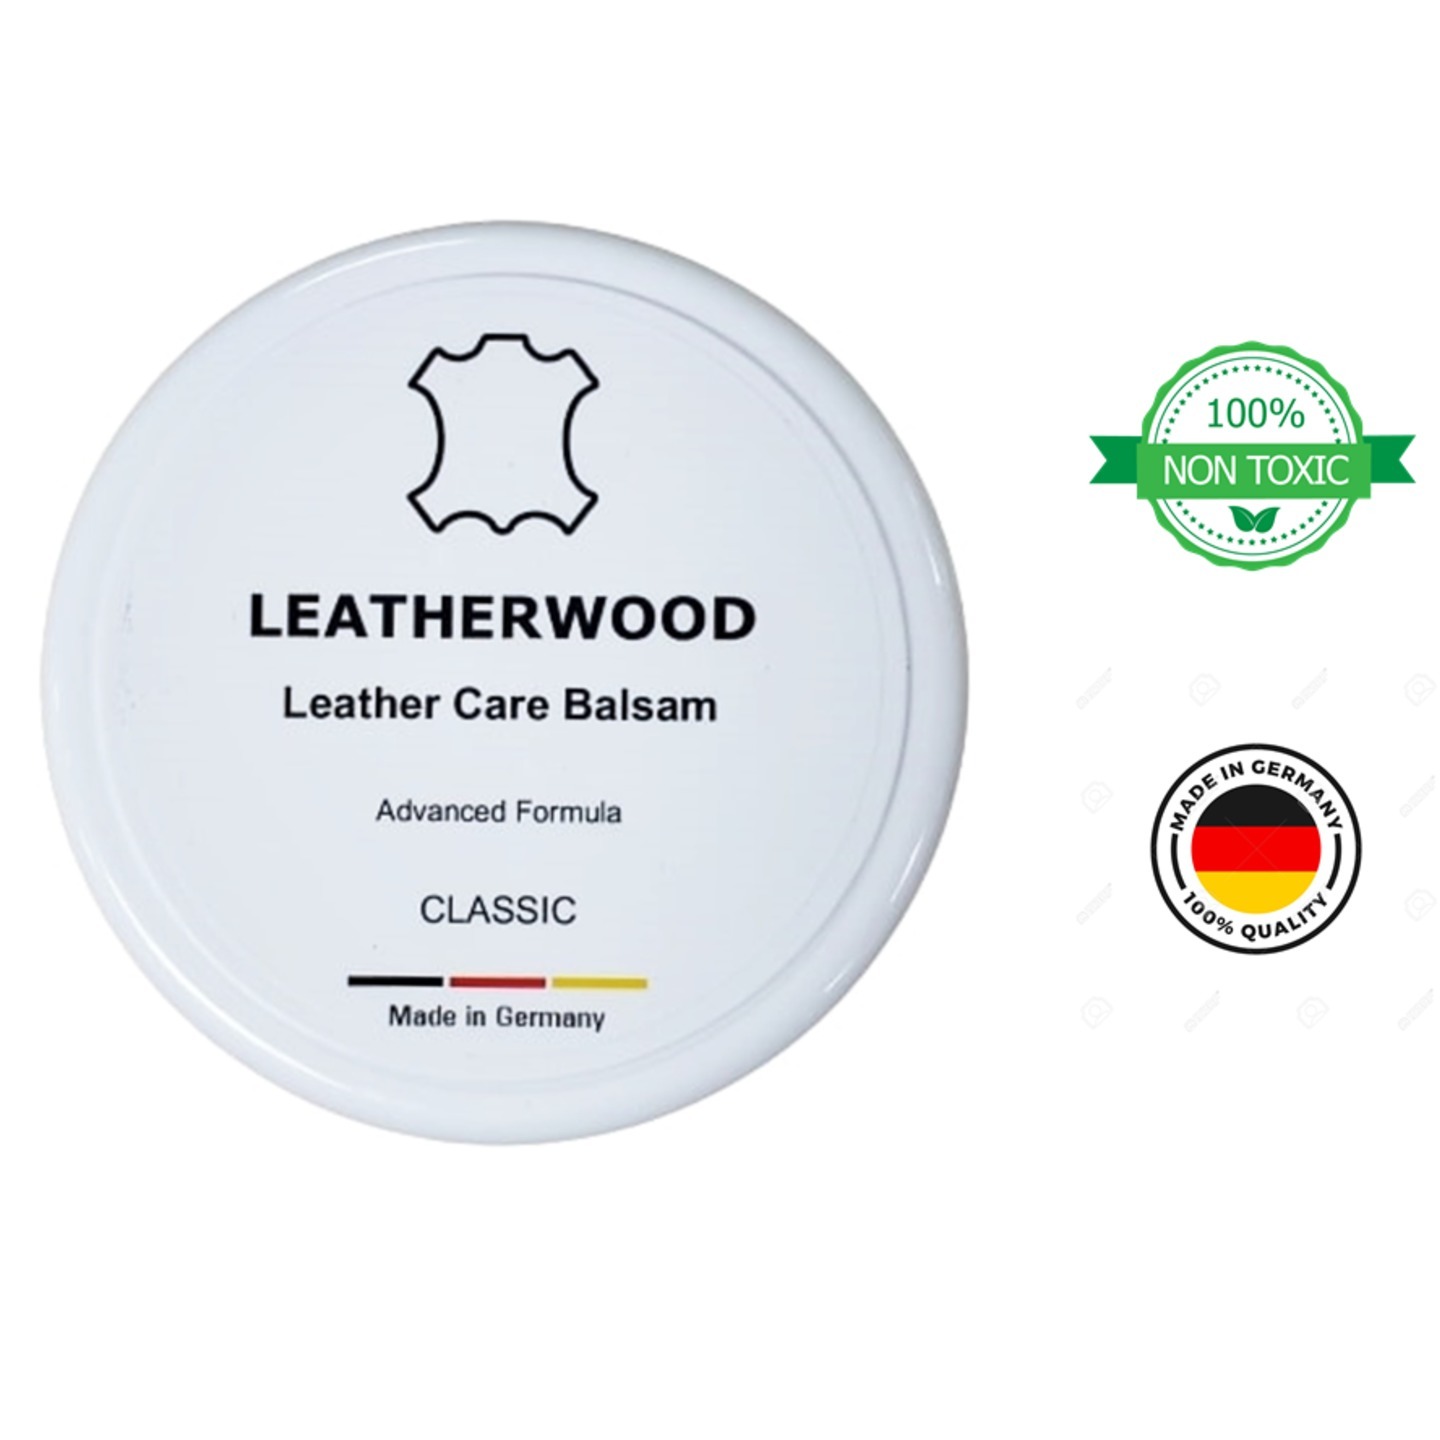 Leatherwood Balsam 250ml - Classic - Cleaner, Conditioner ,Water Repellent - All Leathers including Shoes, Handbags, Garments, Furniture, Automotive Leathers - Made in Germany.